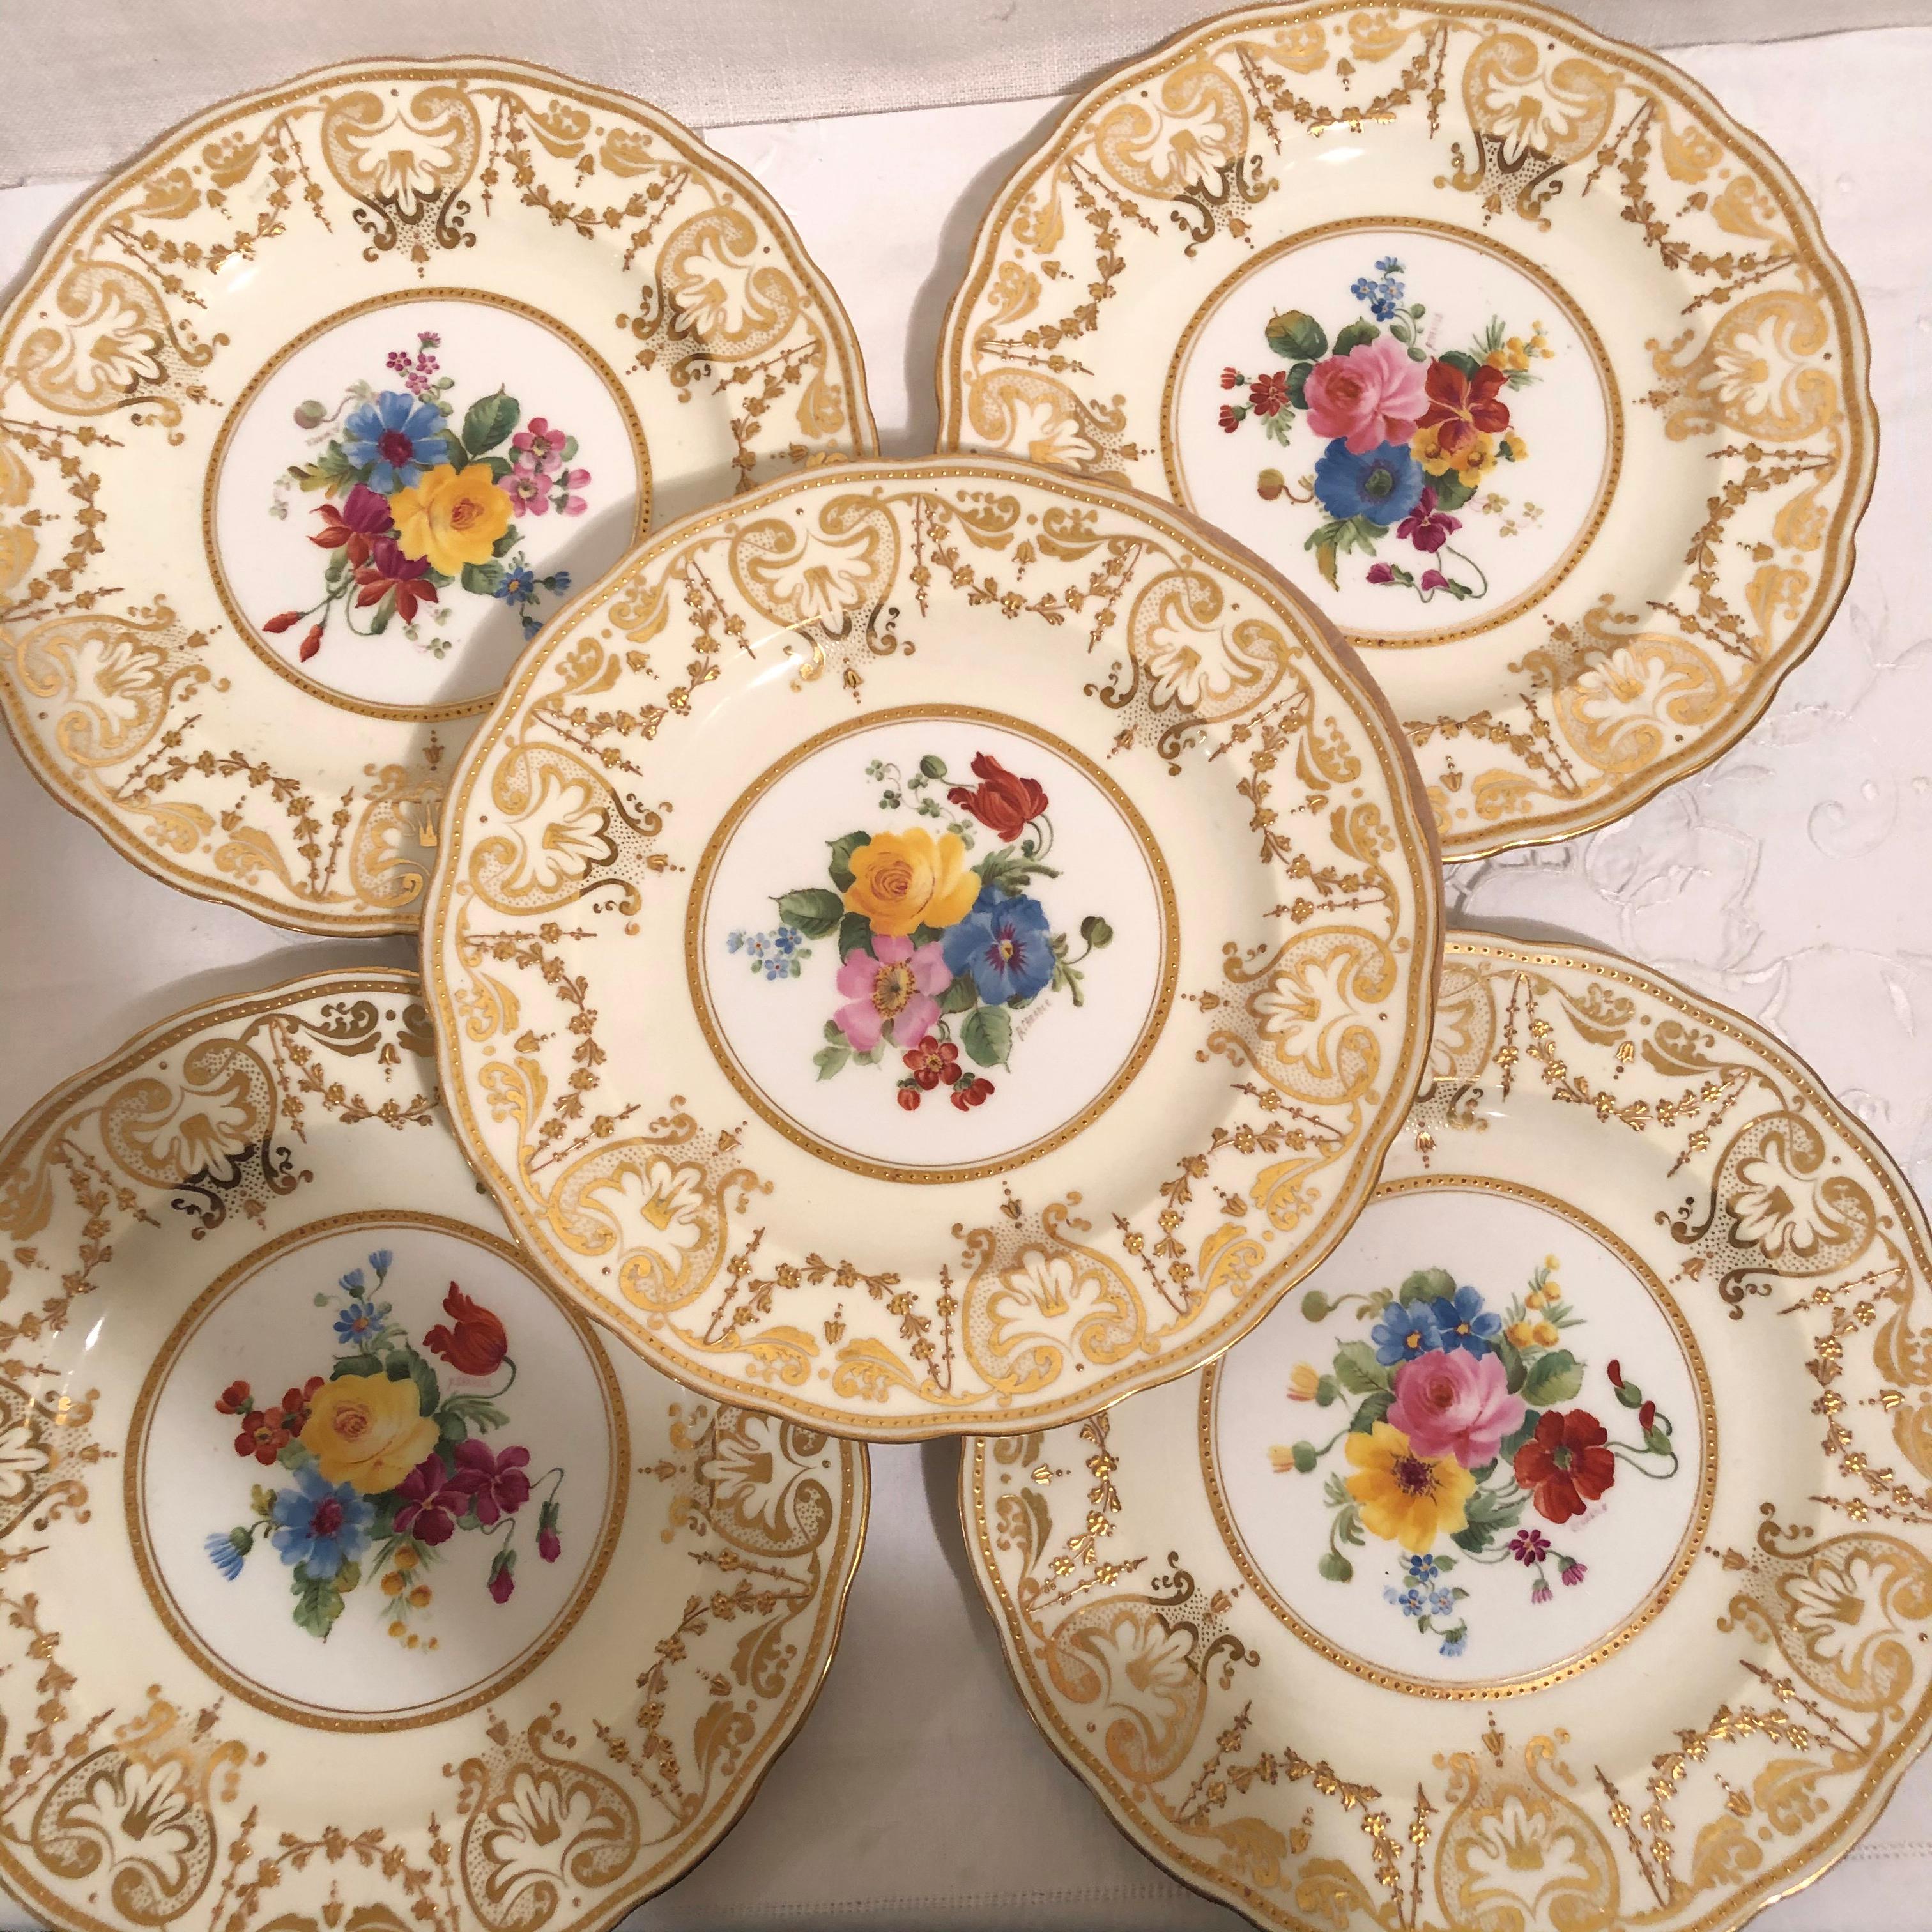 Set of twelve English George Jones made for Tiffany & Co. dessert or luncheon plates painted with flower bouquets. They have hand painted bright color flower bouquets which were artist signed B. Cheadle. The borders are a pale yellow ground with